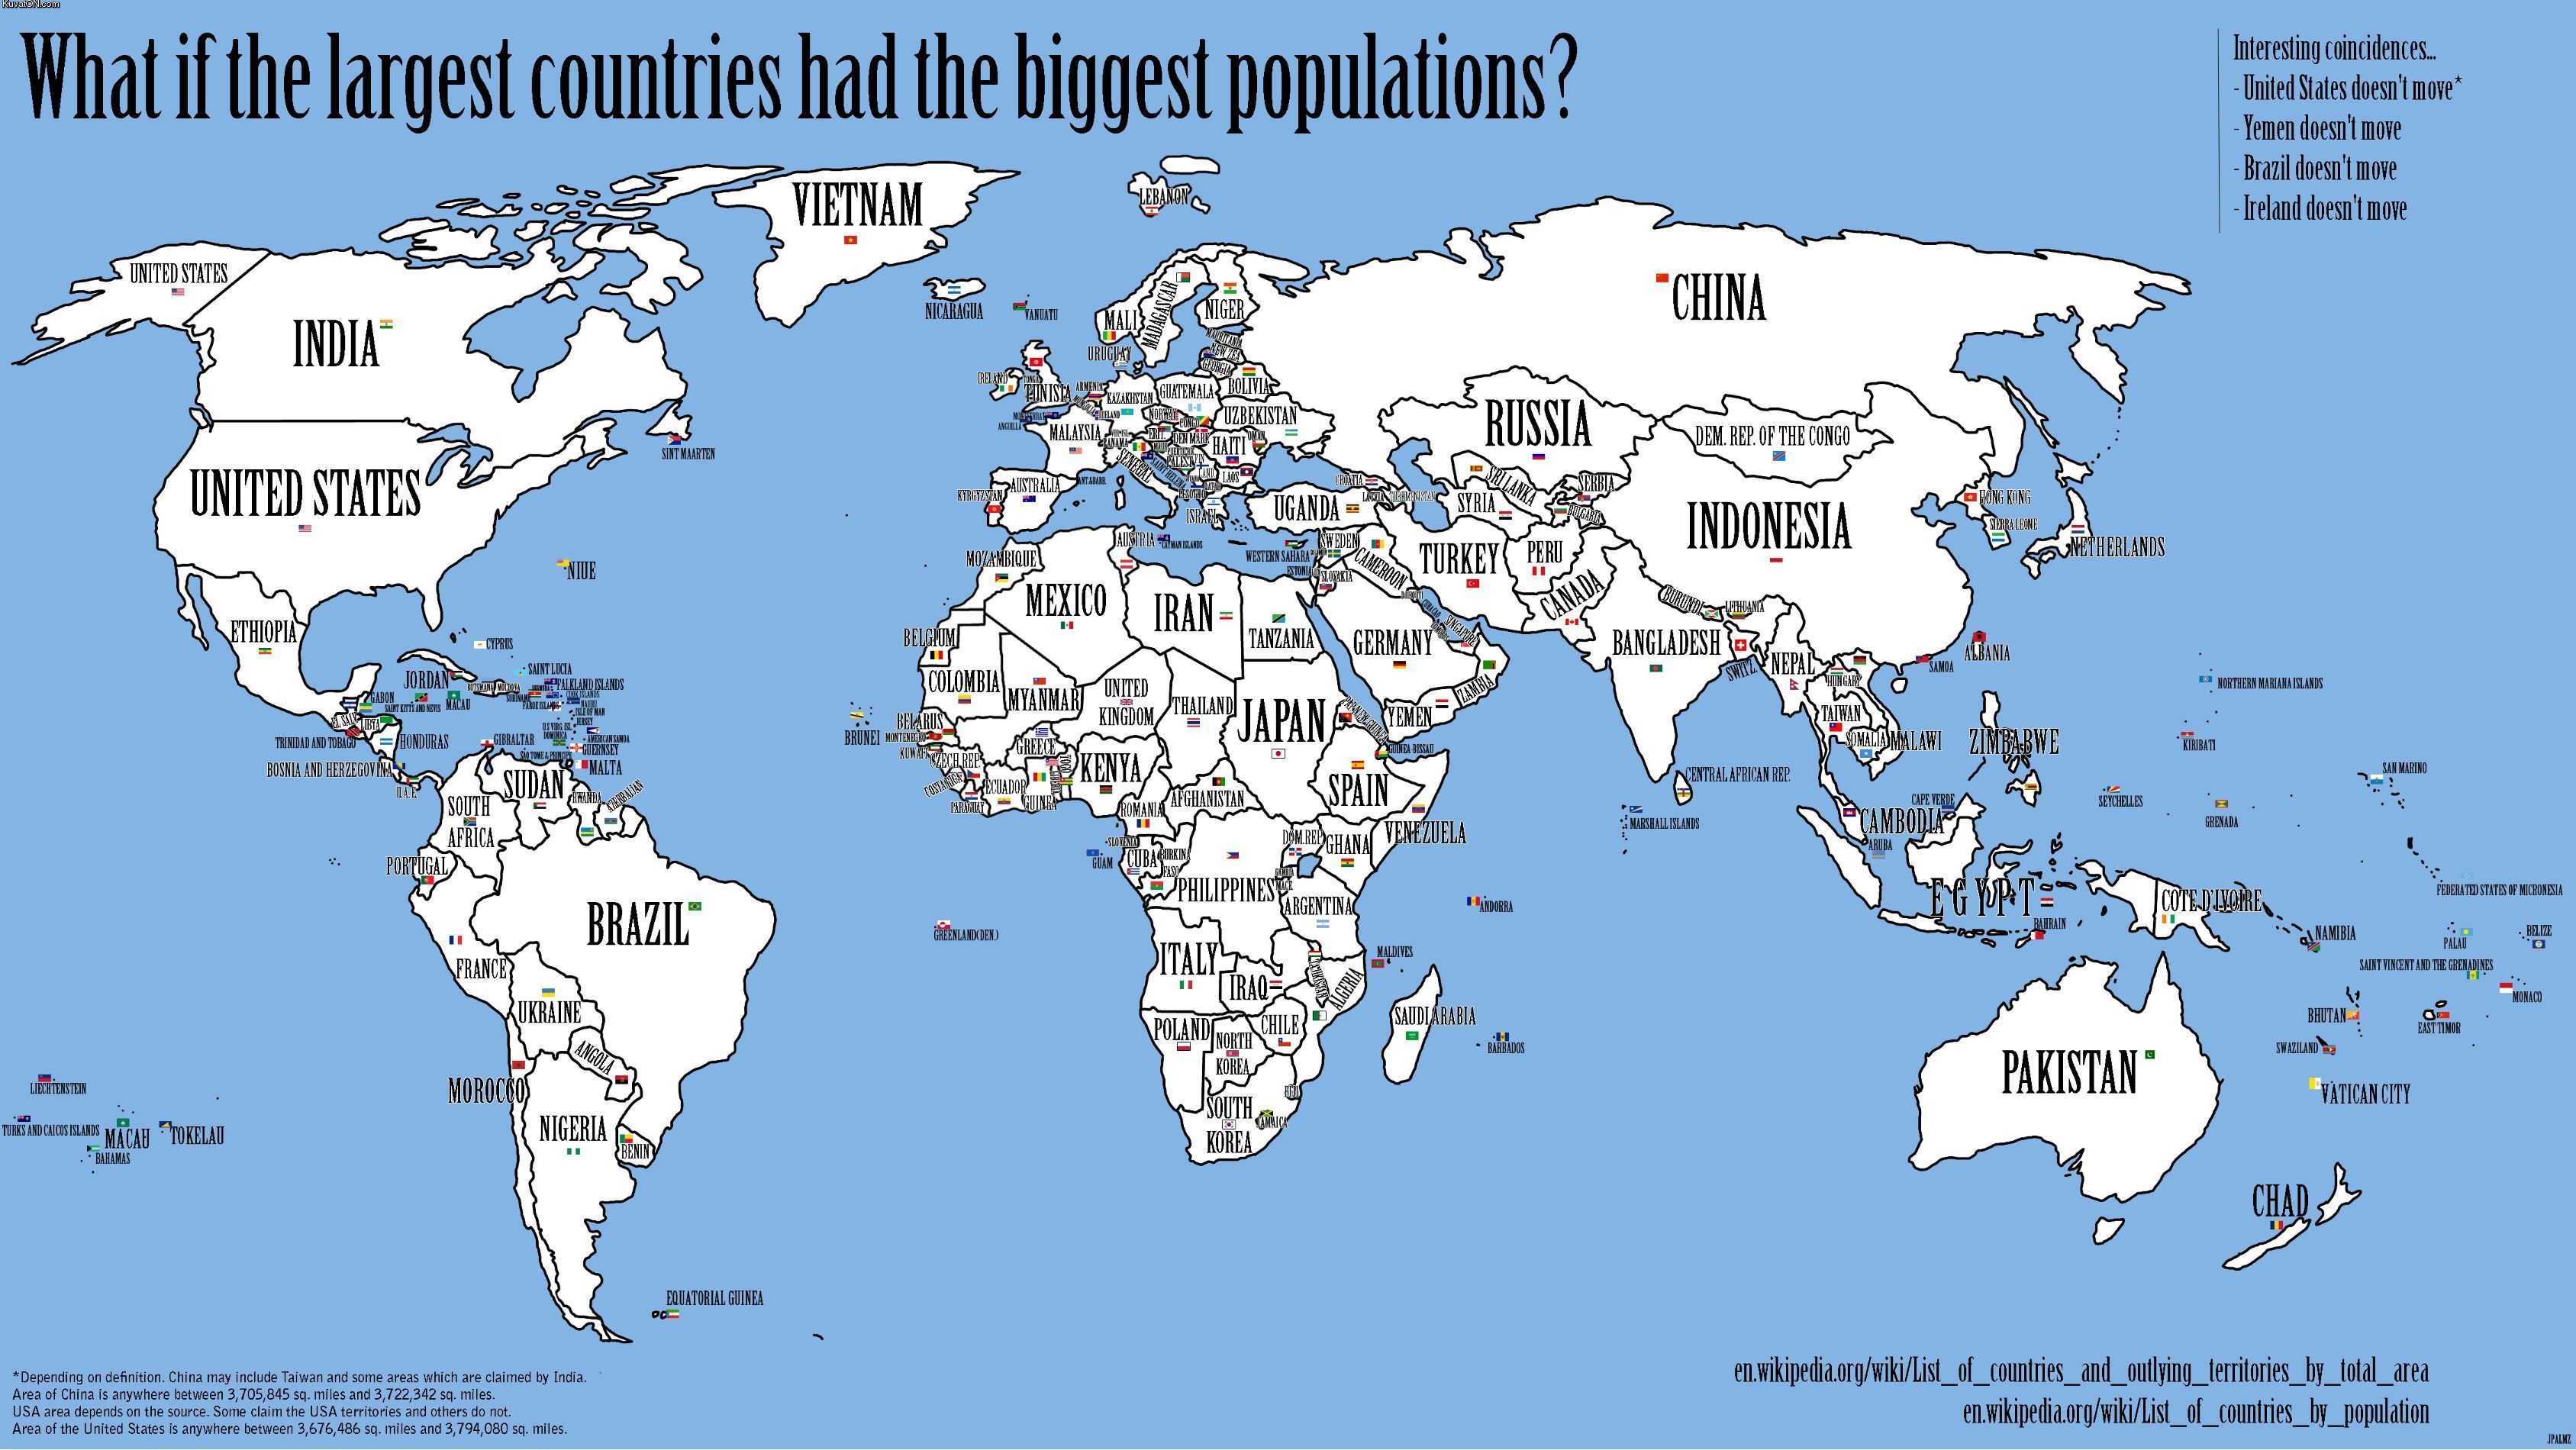 what_if_the_largest_countries_had_the_biggest_populations.jpg